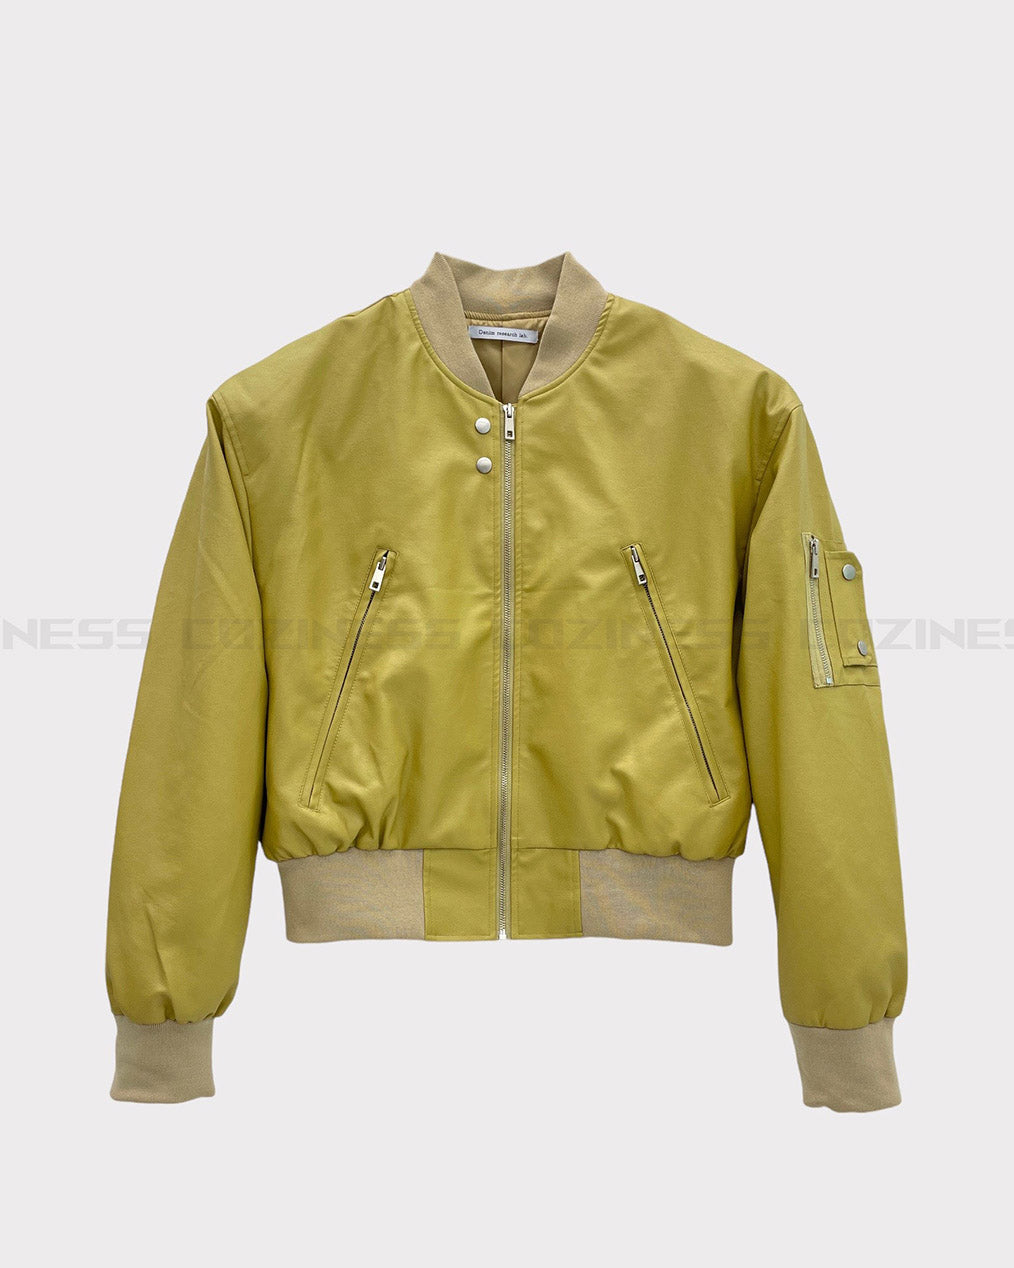 MG Muscle Shoulder Pad Crop Leather Jacket (3 colors)